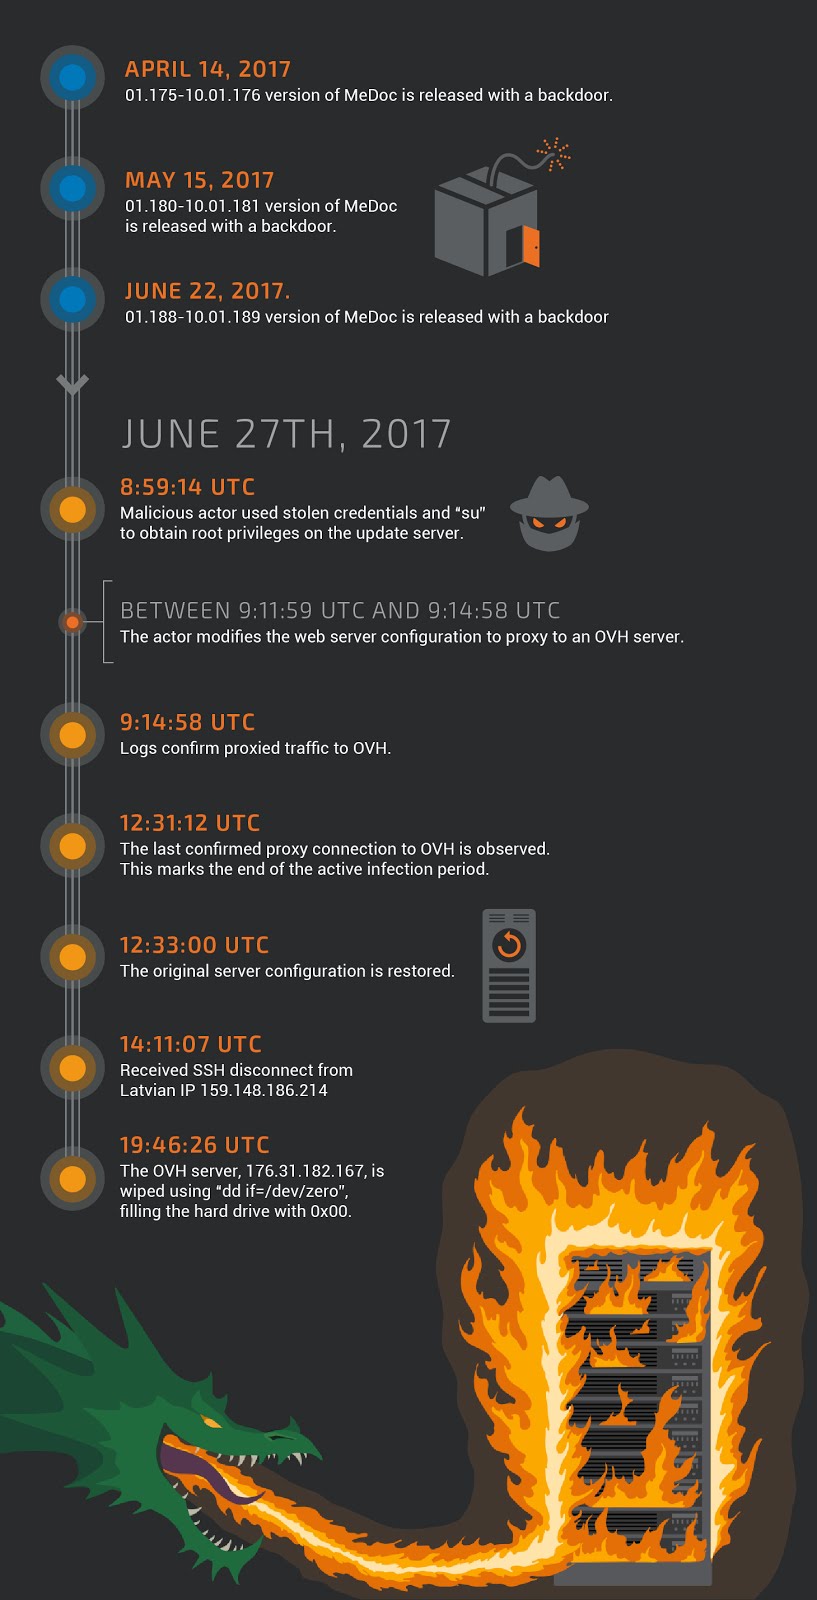 Timeline of M.E.Doc server activity and NotPetya attacks